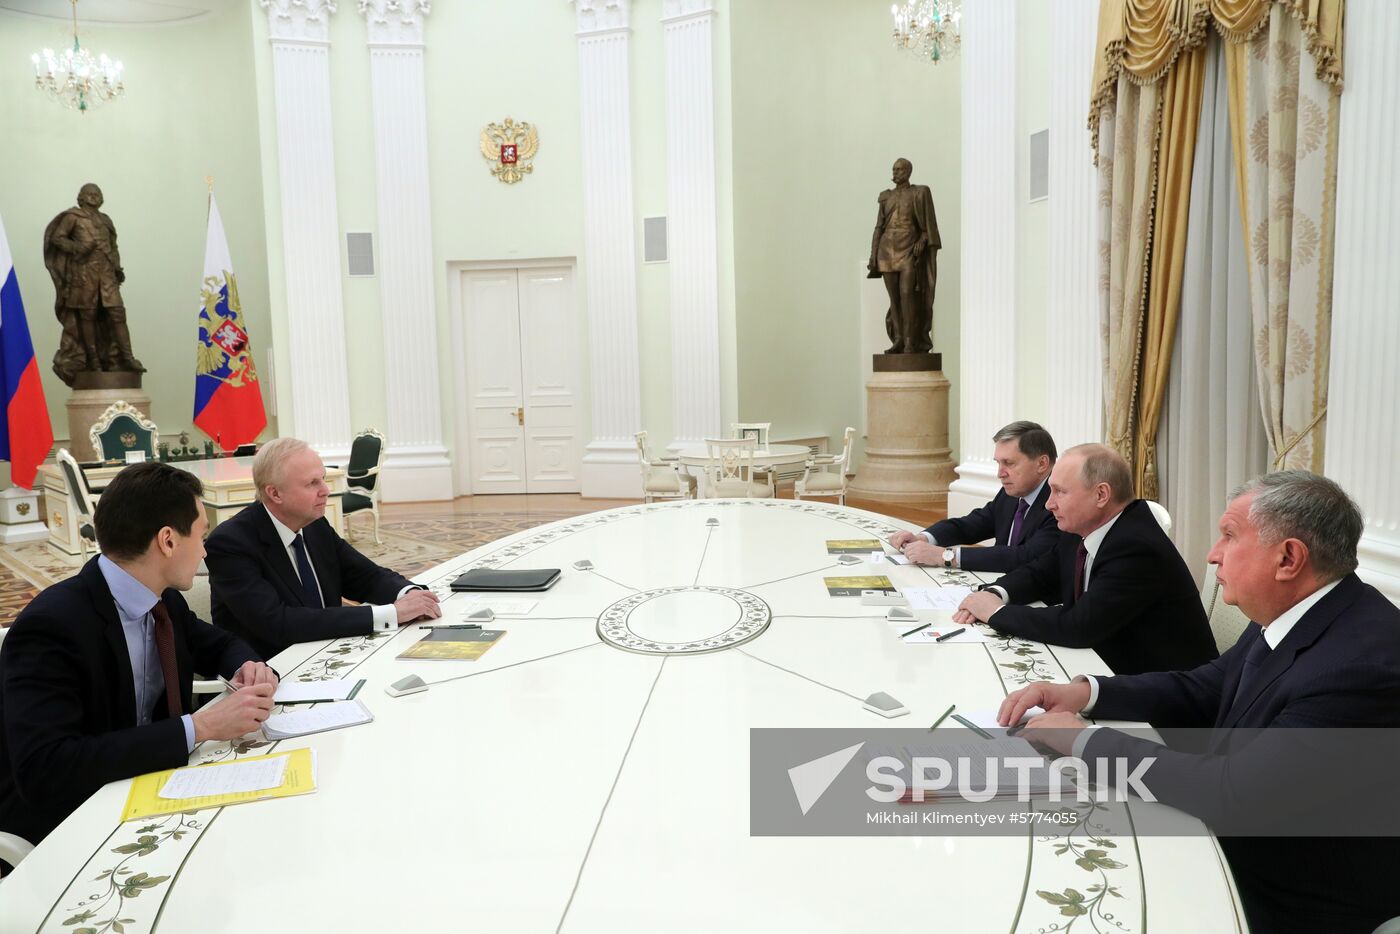 President Putin meets with BP CEO Dudley